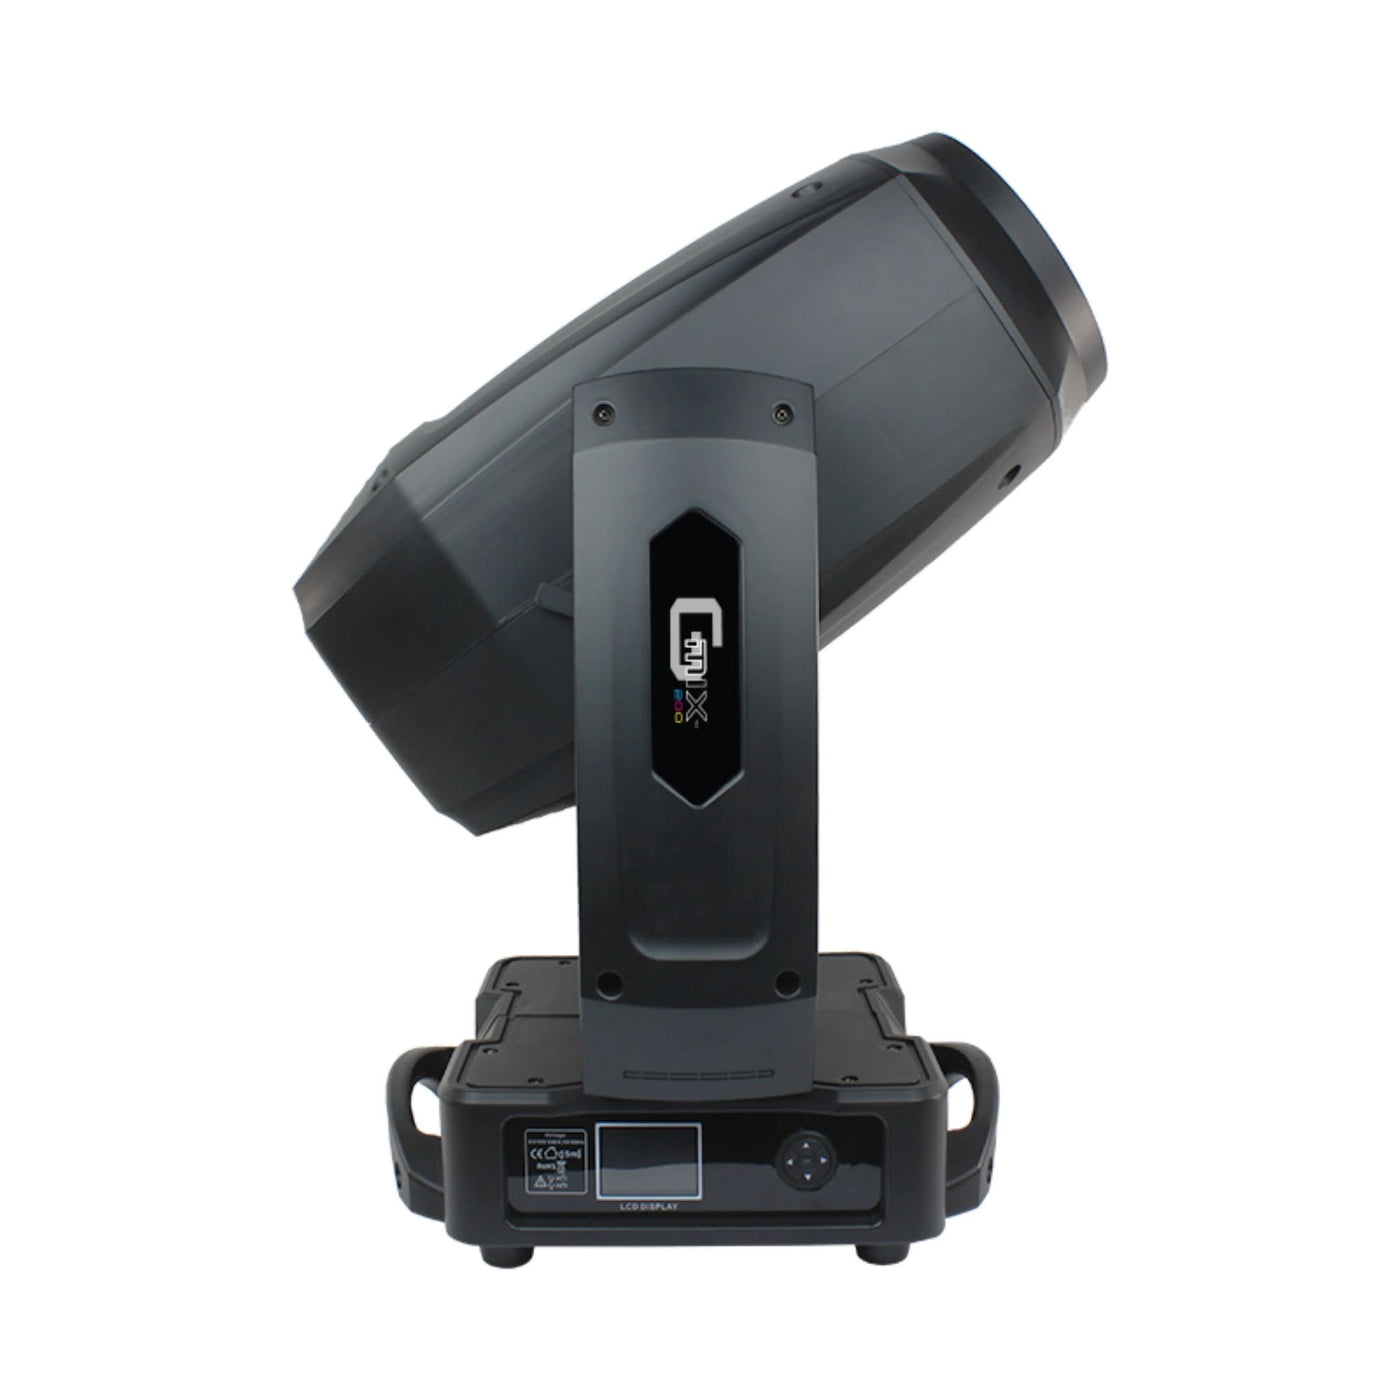 Blizzard 124008 G-Mix Moving Head with 200 200W LED, CMY, 14 Gobos, 9+ Colors